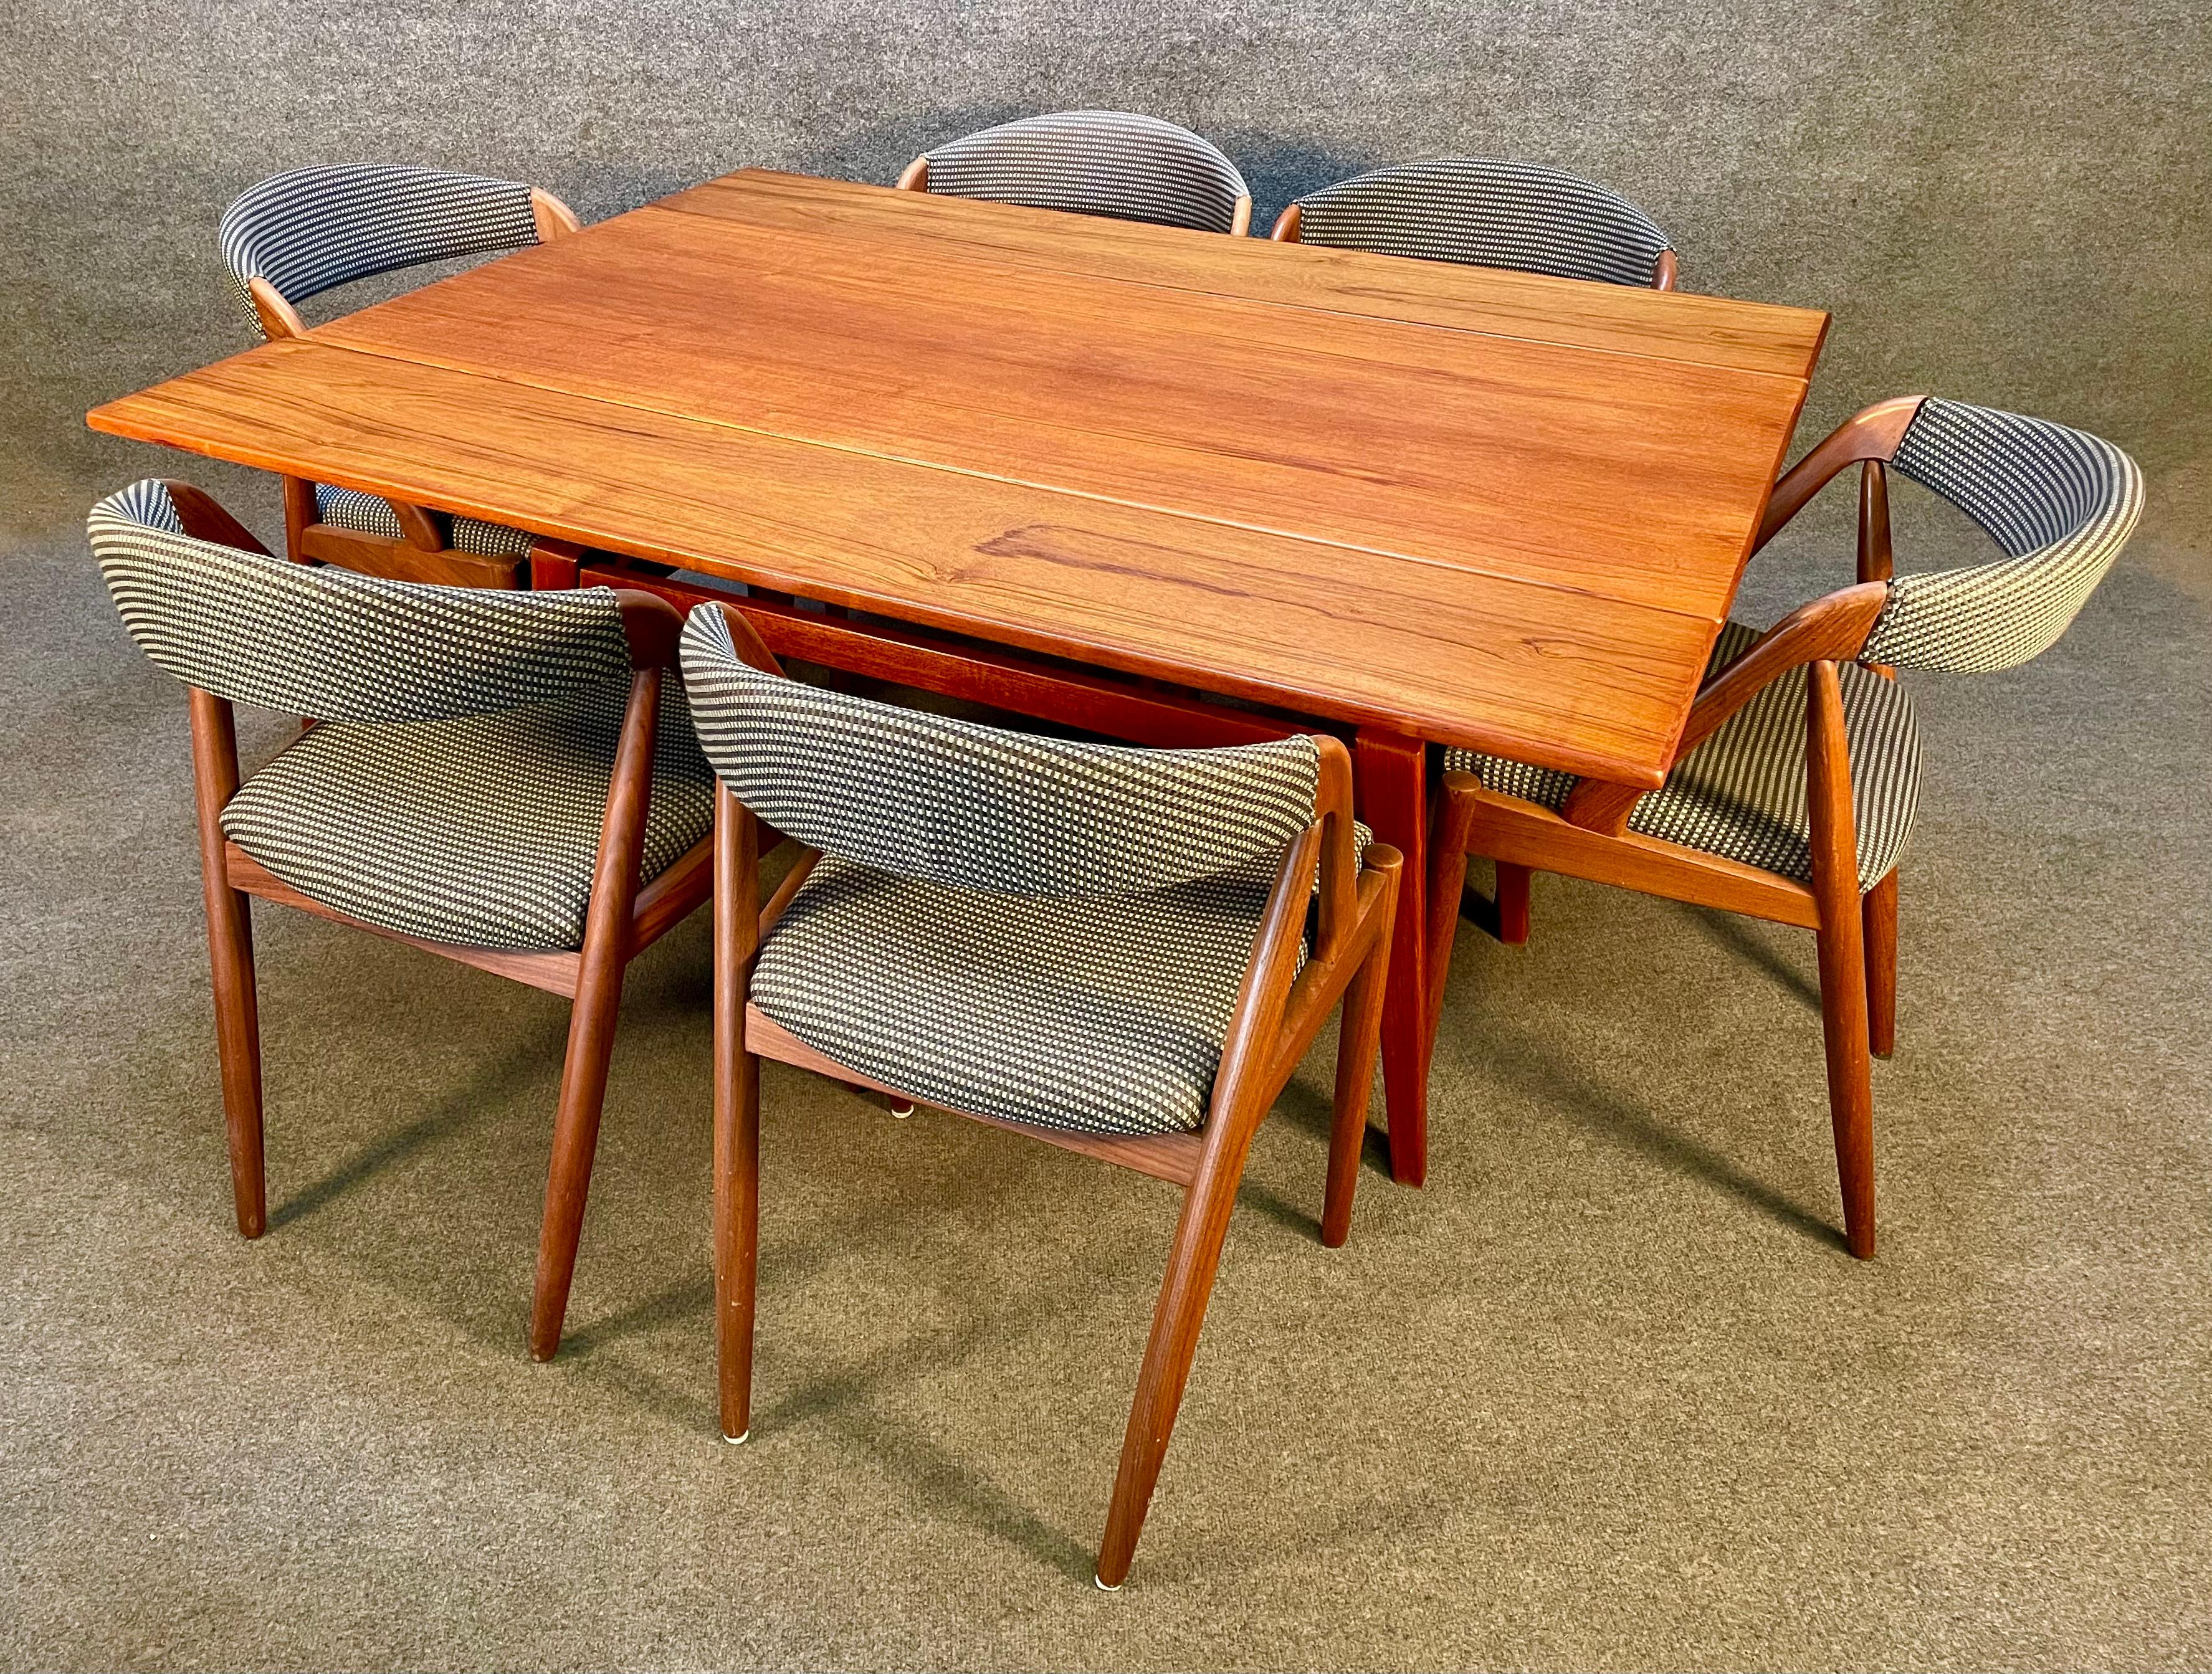 Here is a beautiful scandinavian modern elevator cocktail-dining table in teak manufactured in Denmark in the 1960's.
This clever table, recently imported from Europe to California before its refinishing, features a vibrant wood grain and a lift up